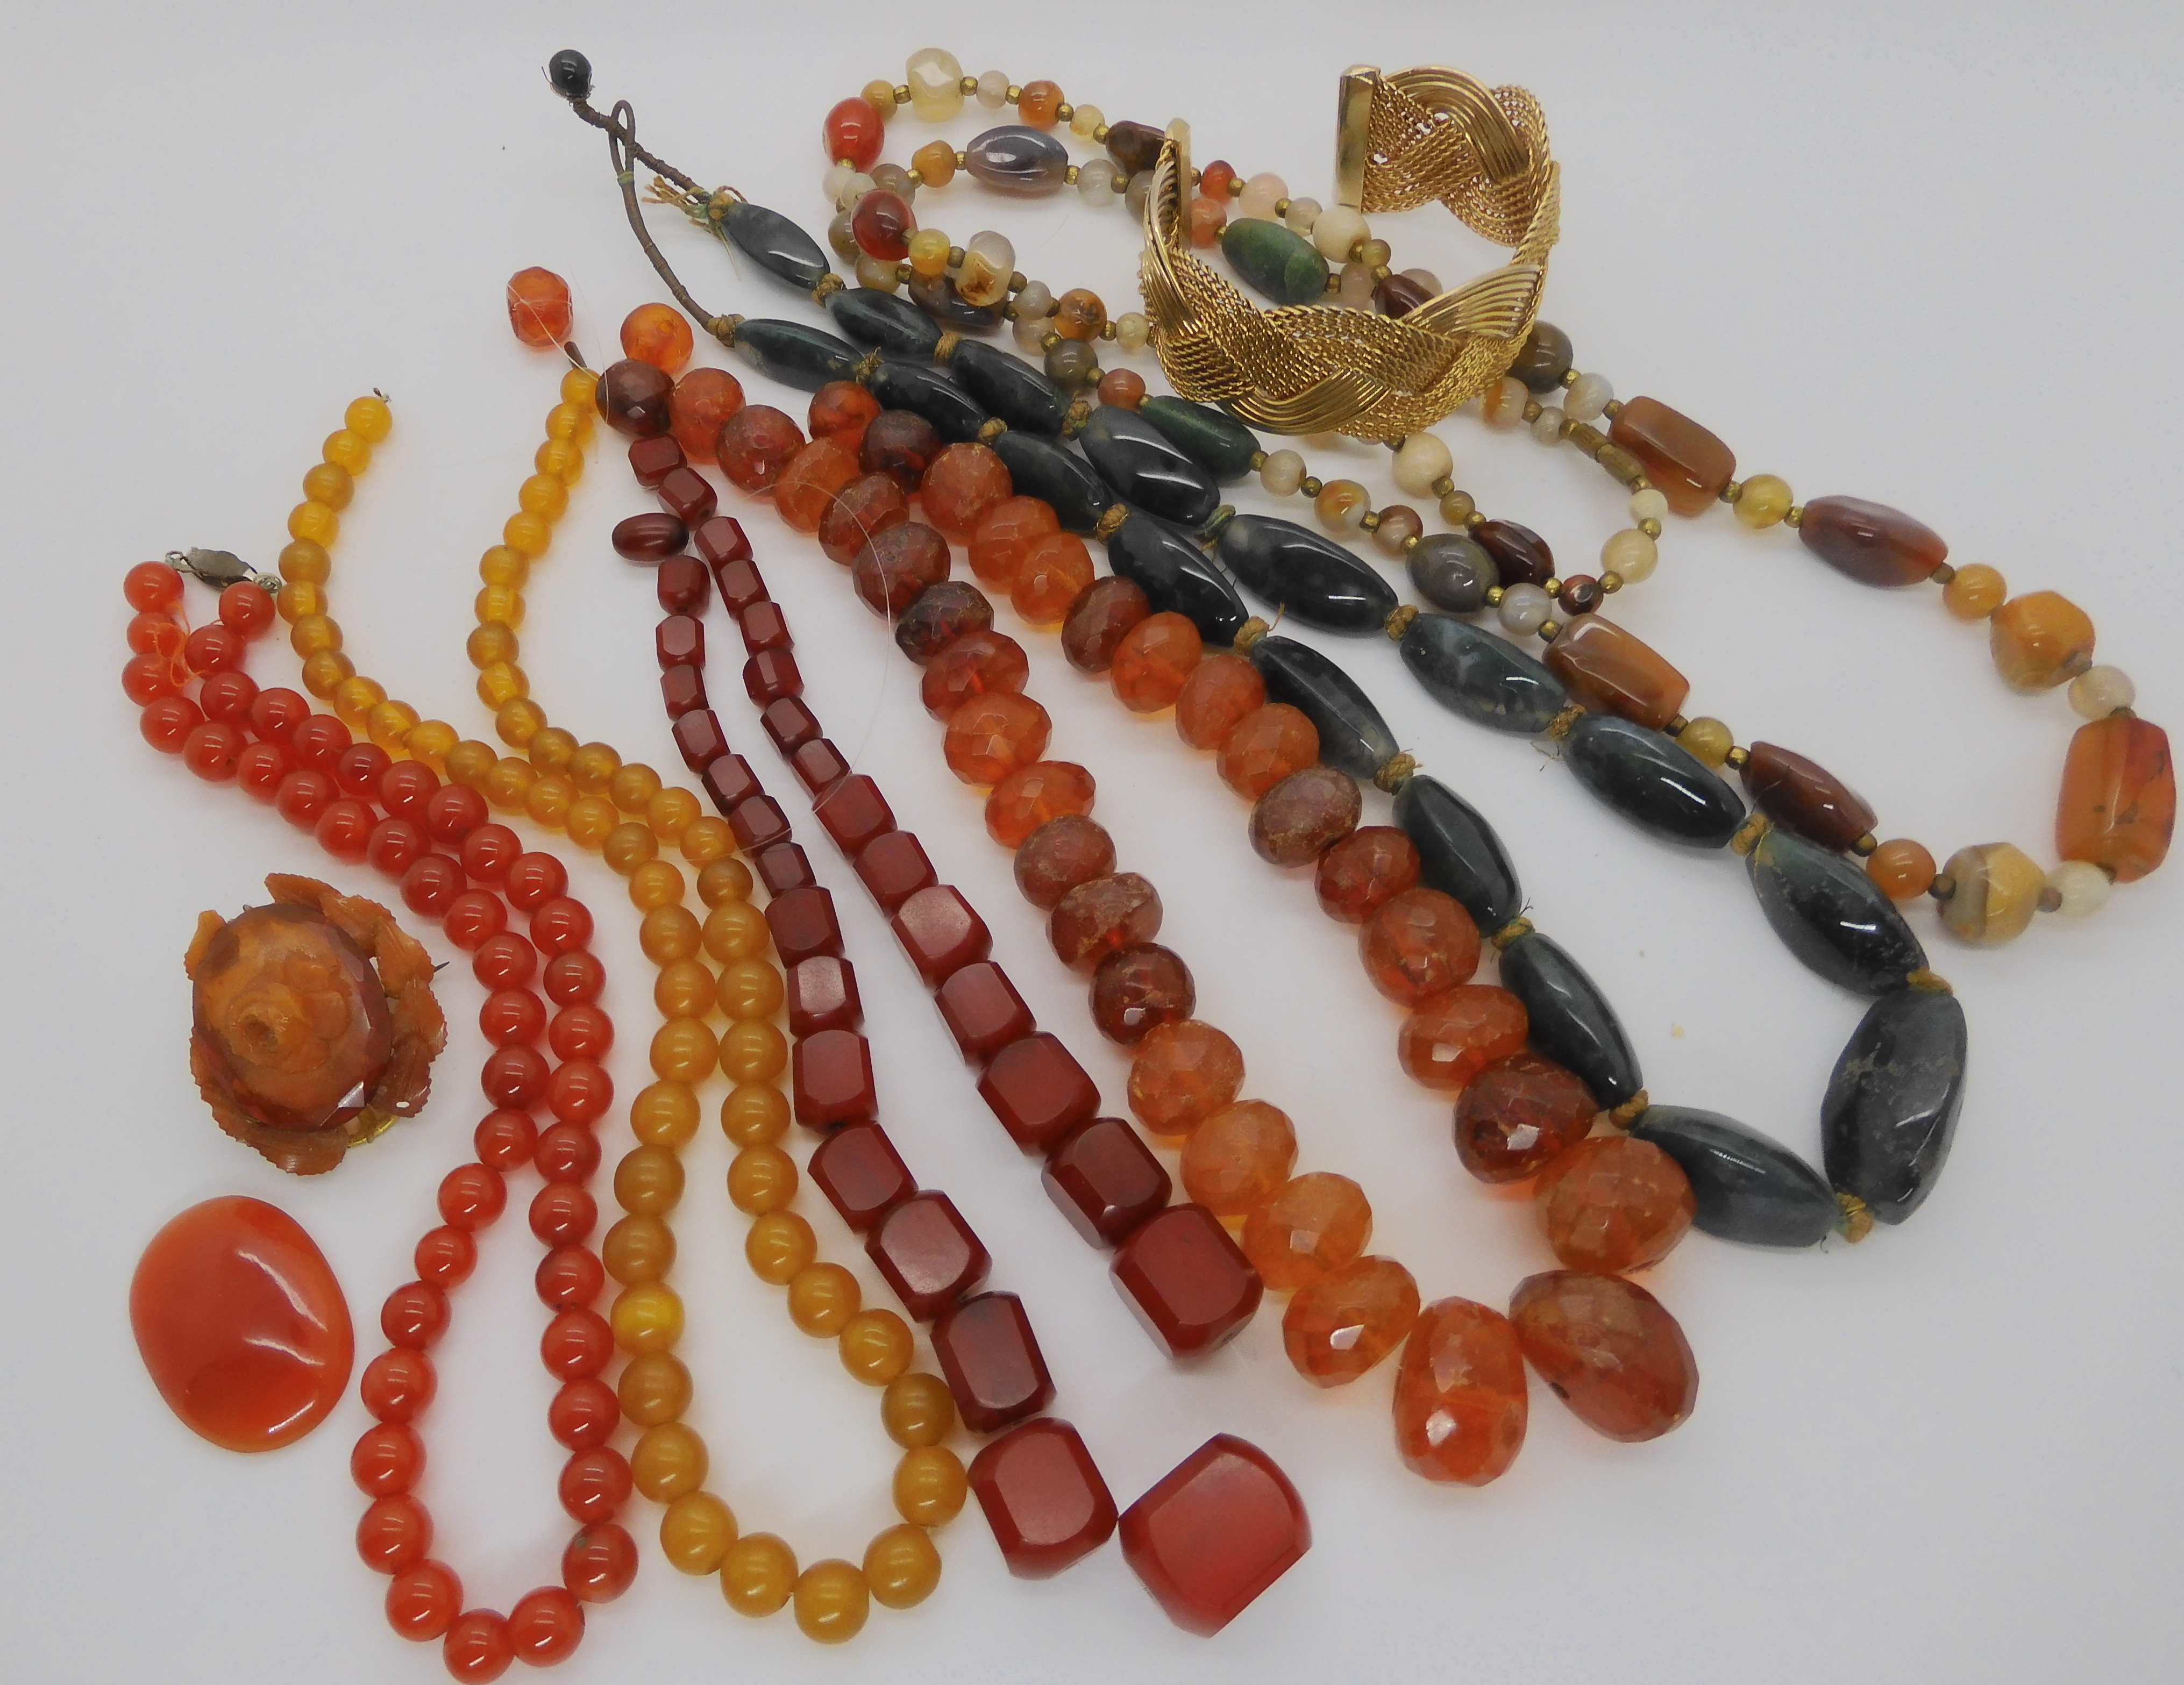 Amber beads, carnelian and other agate beads, vintage beads etc Condition Report: Not available